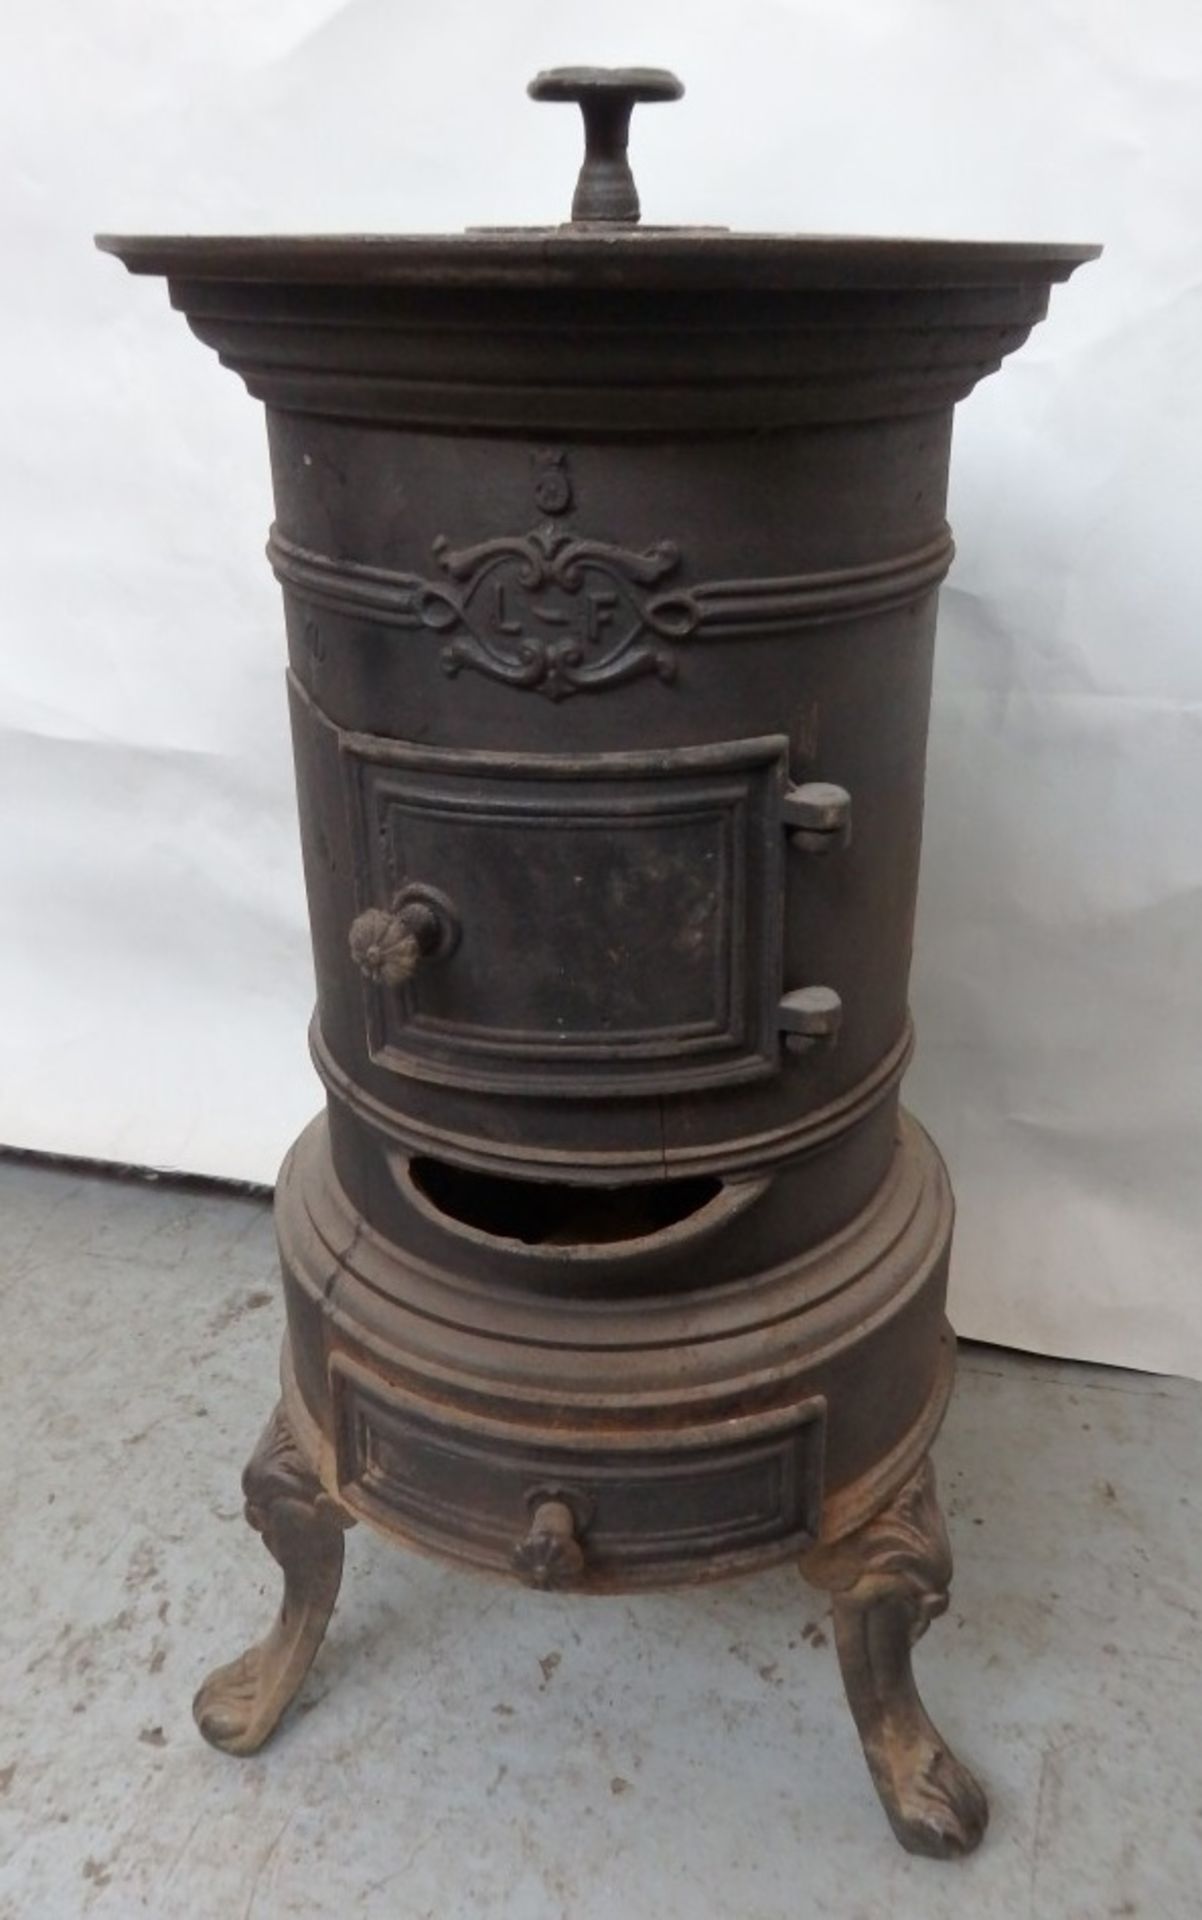 1 x Reclaimed Antique Cast Iron Potbelly Wood Burner / Stove - Dimensions: H61, Diameter 30cm - - Image 9 of 9